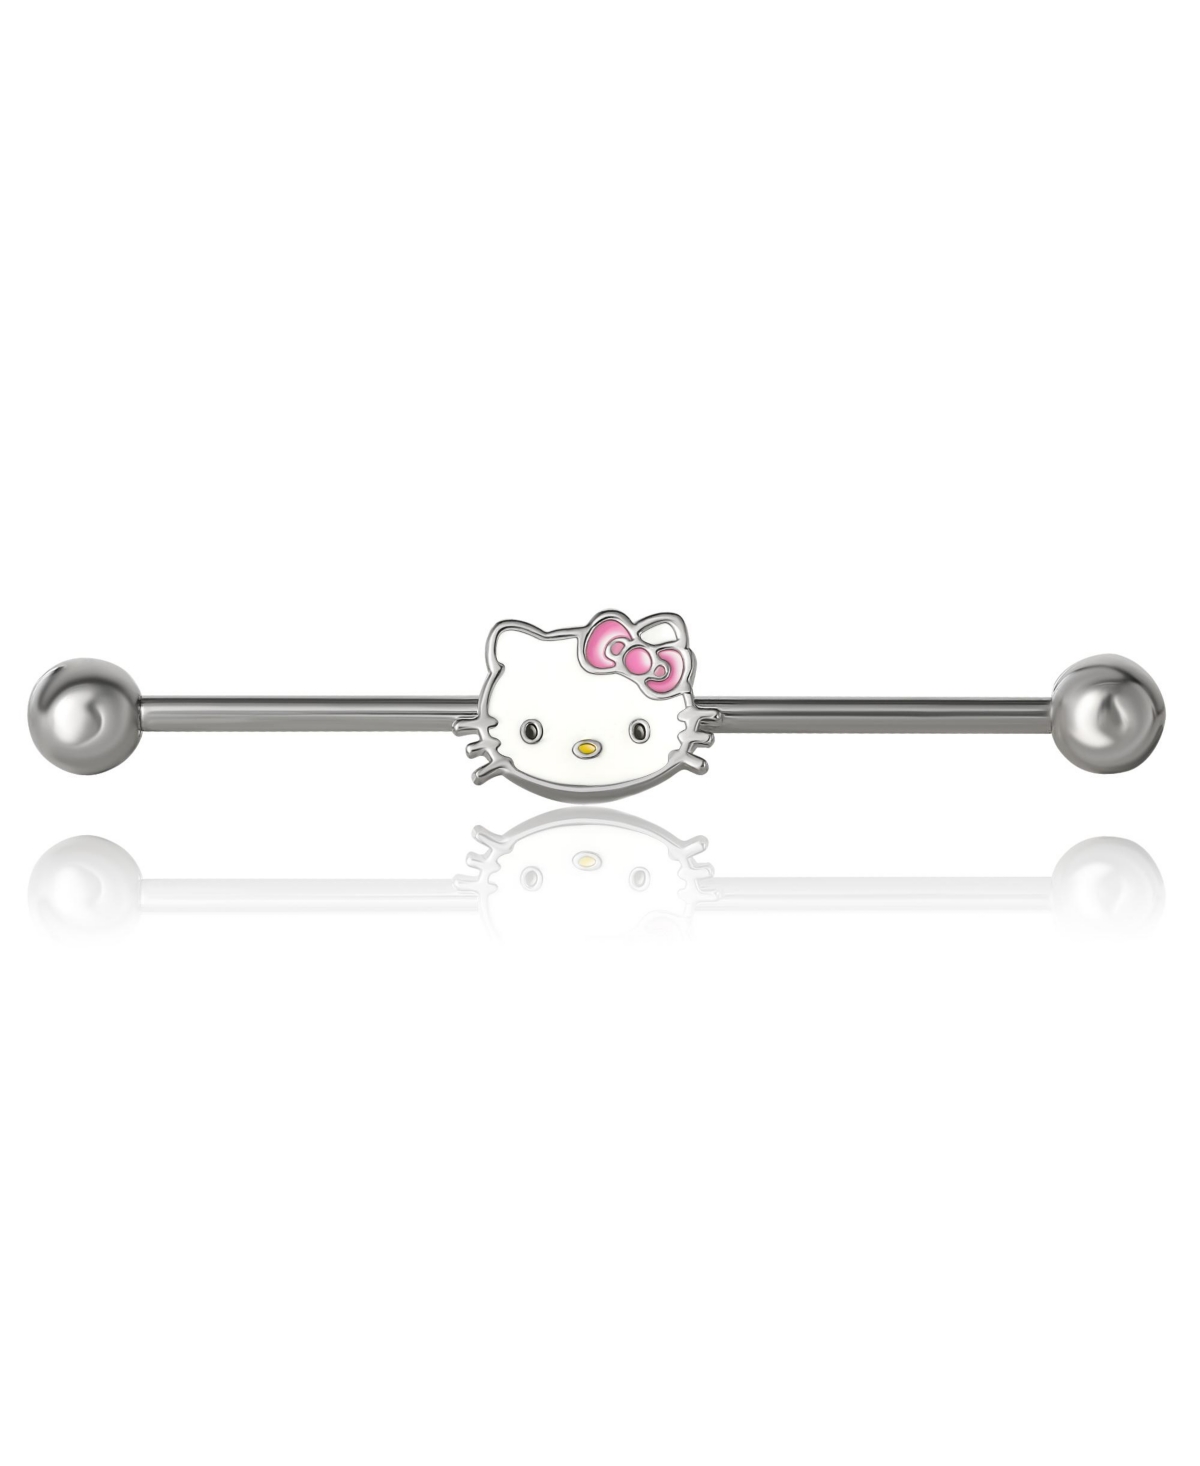 Sanrio Womens Cartilage Earring Jewelry, Stainless Steel Piercing Element with Slide Charm, Official License - Silver tone, white